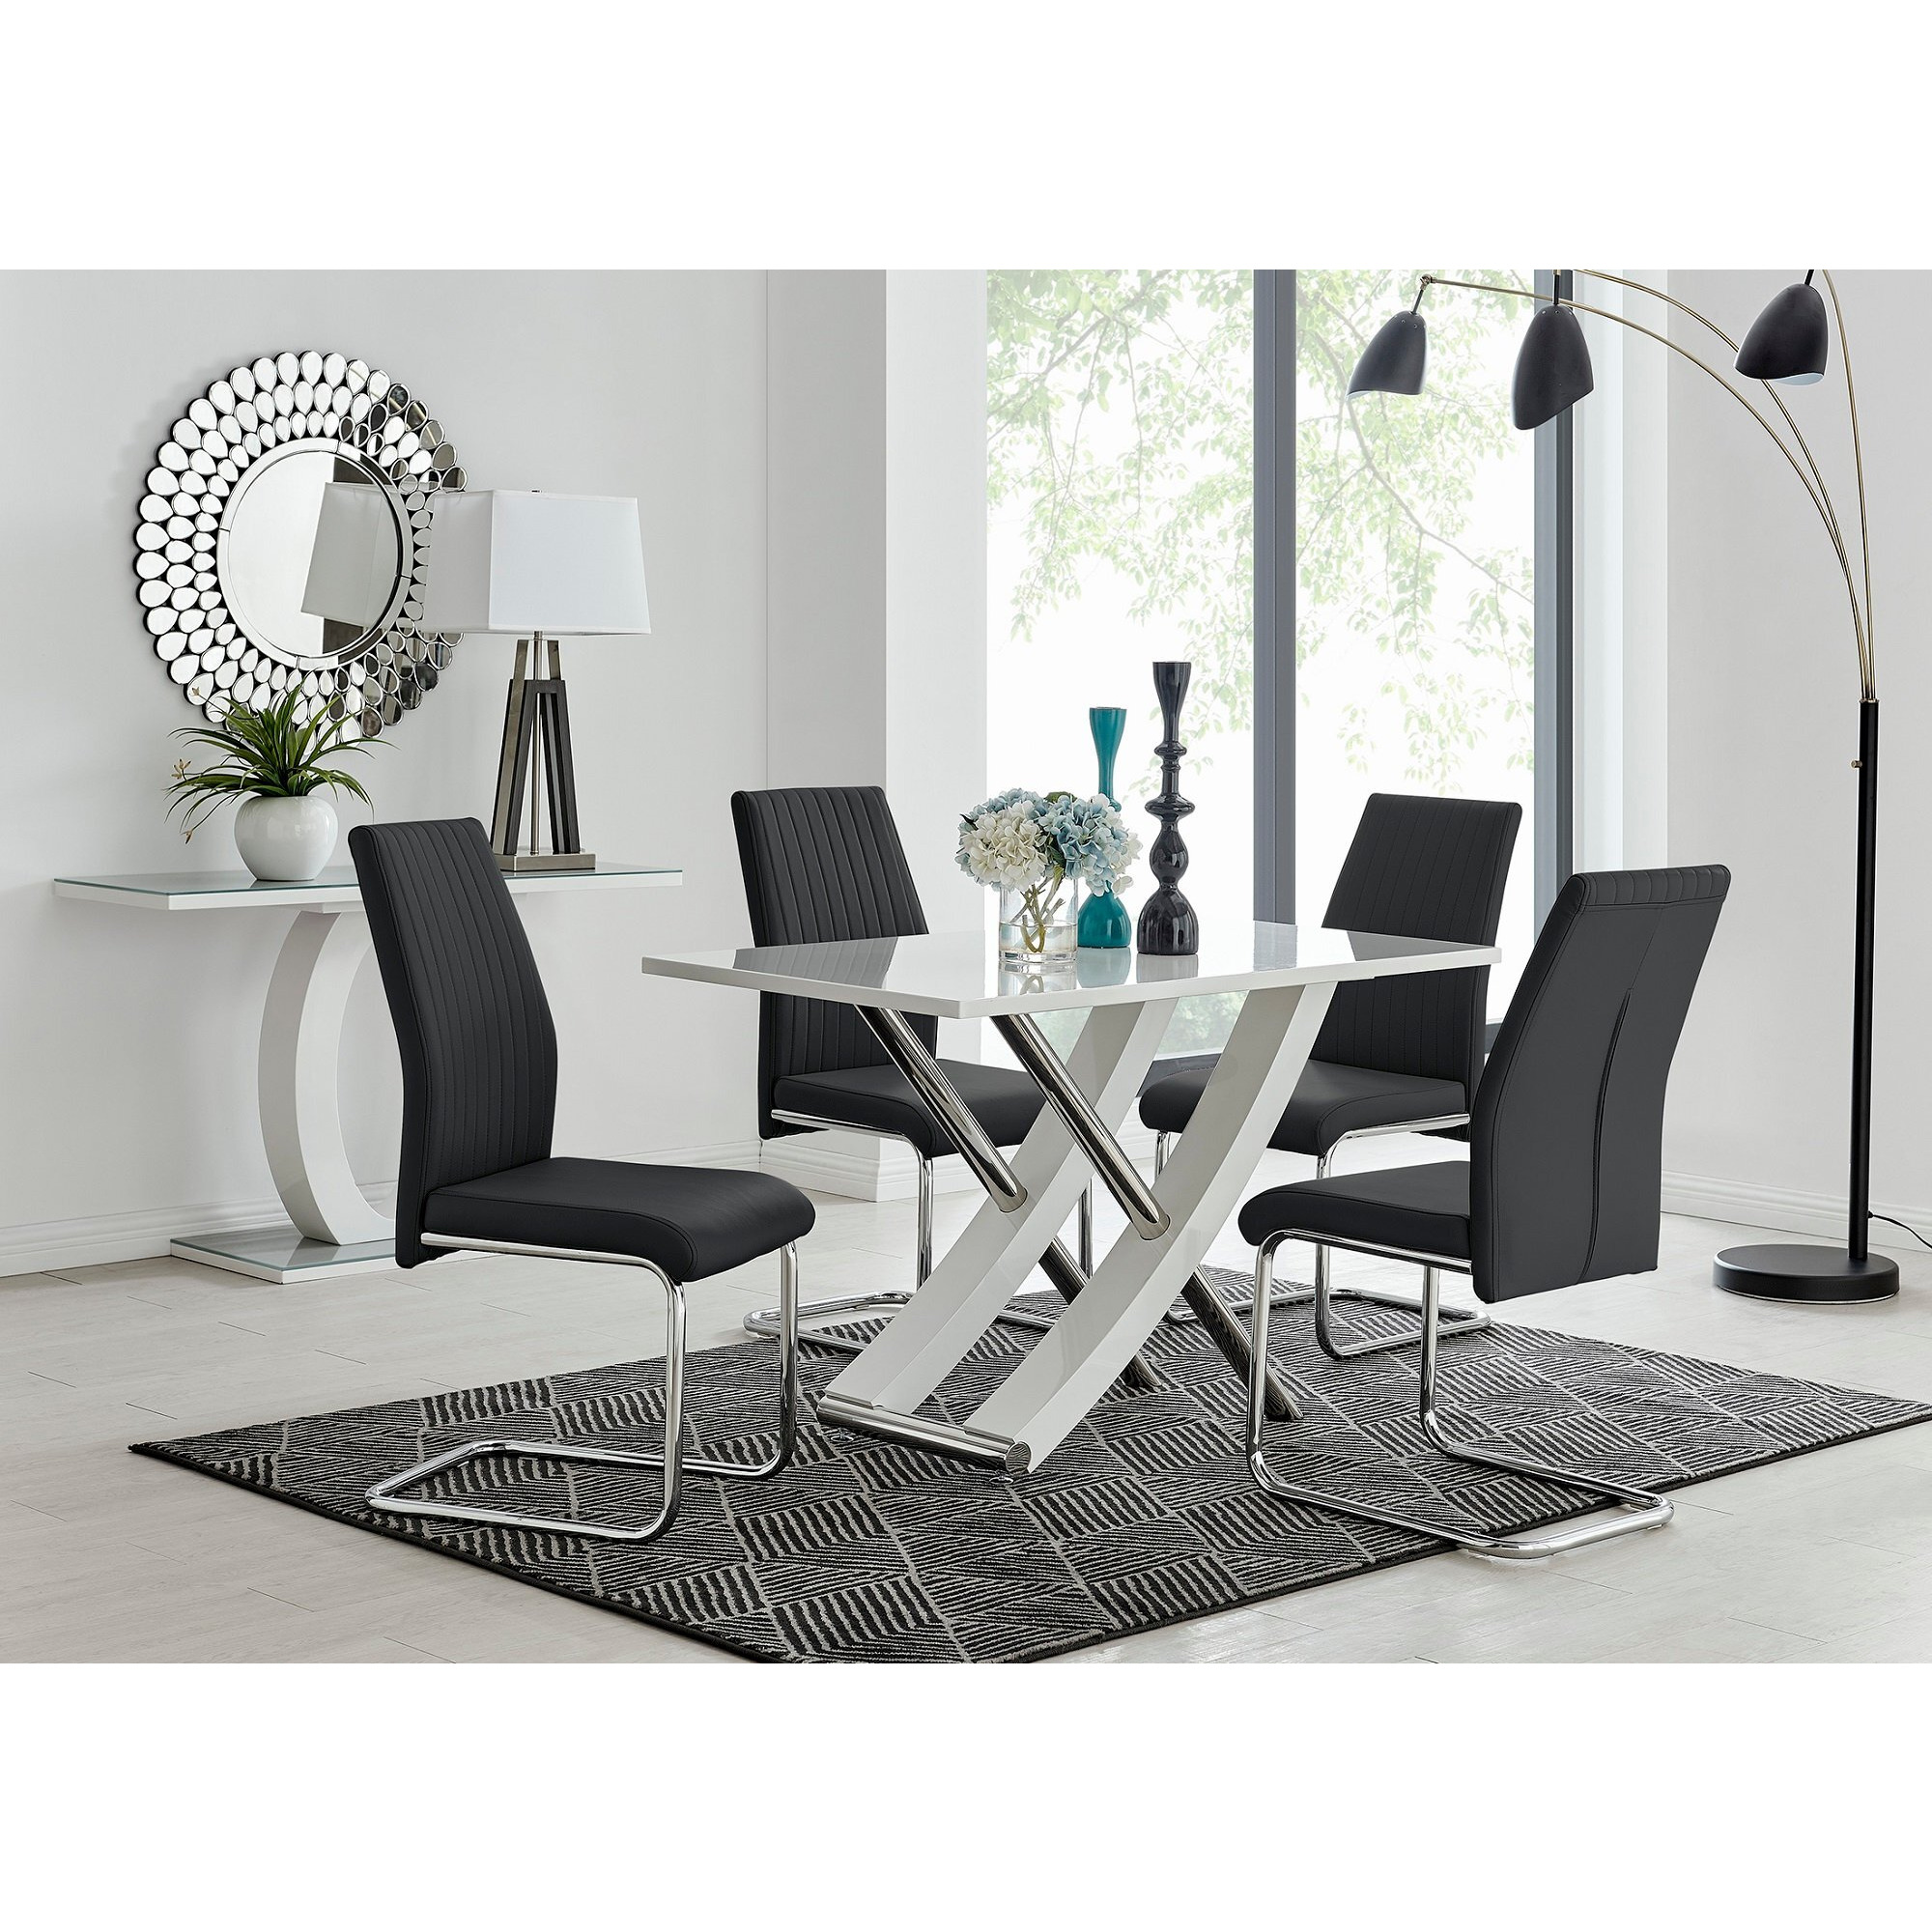 Mayfair 4 White High Gloss And Stainless Steel Dining Table And 4 Lorenzo Chairs Set